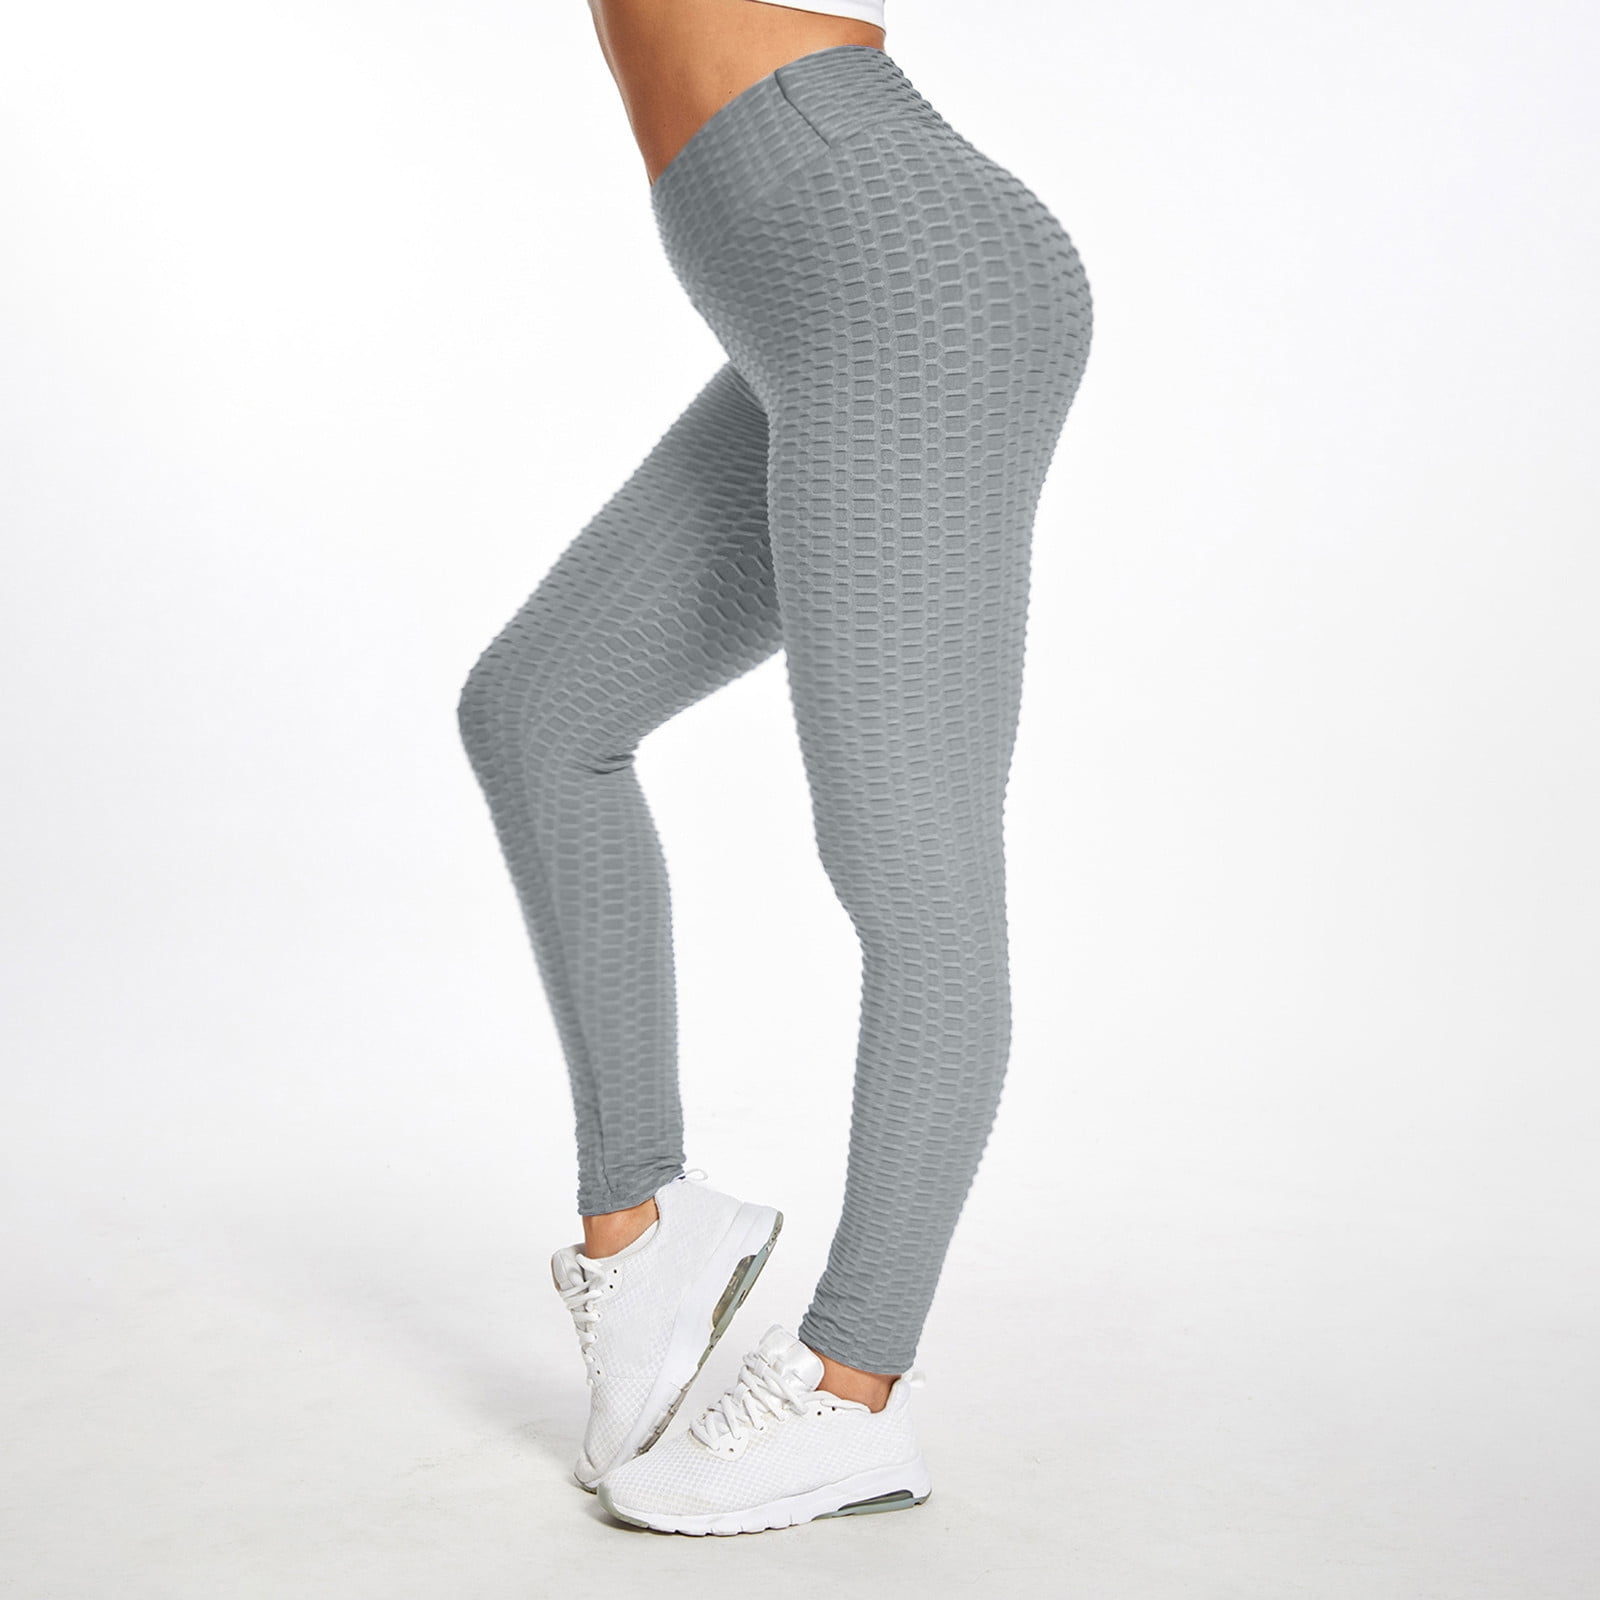 Glossy High Waist Seamless Yoga Silver Leggings Womens For Women Sealed And  Sexy Satin Trousers For Summer Style 230609 From Men02, $14.39